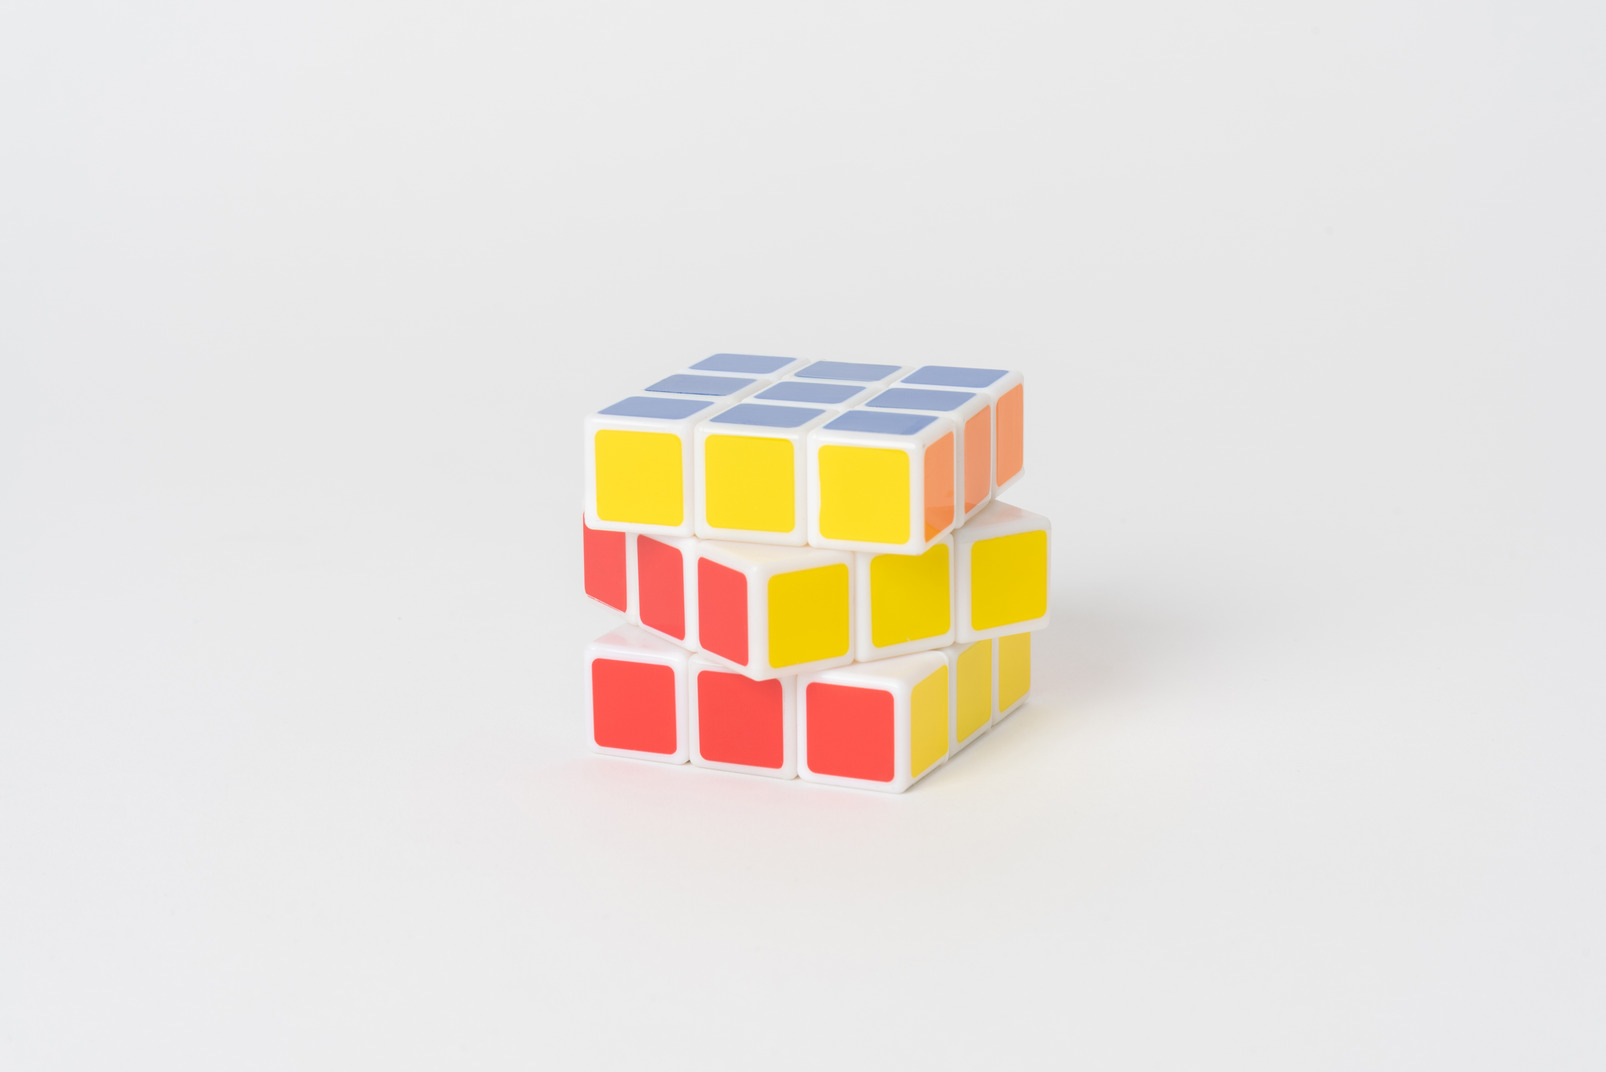 Pastel-coloured rubik's cube for training your kids' mind and aesthetic preferences